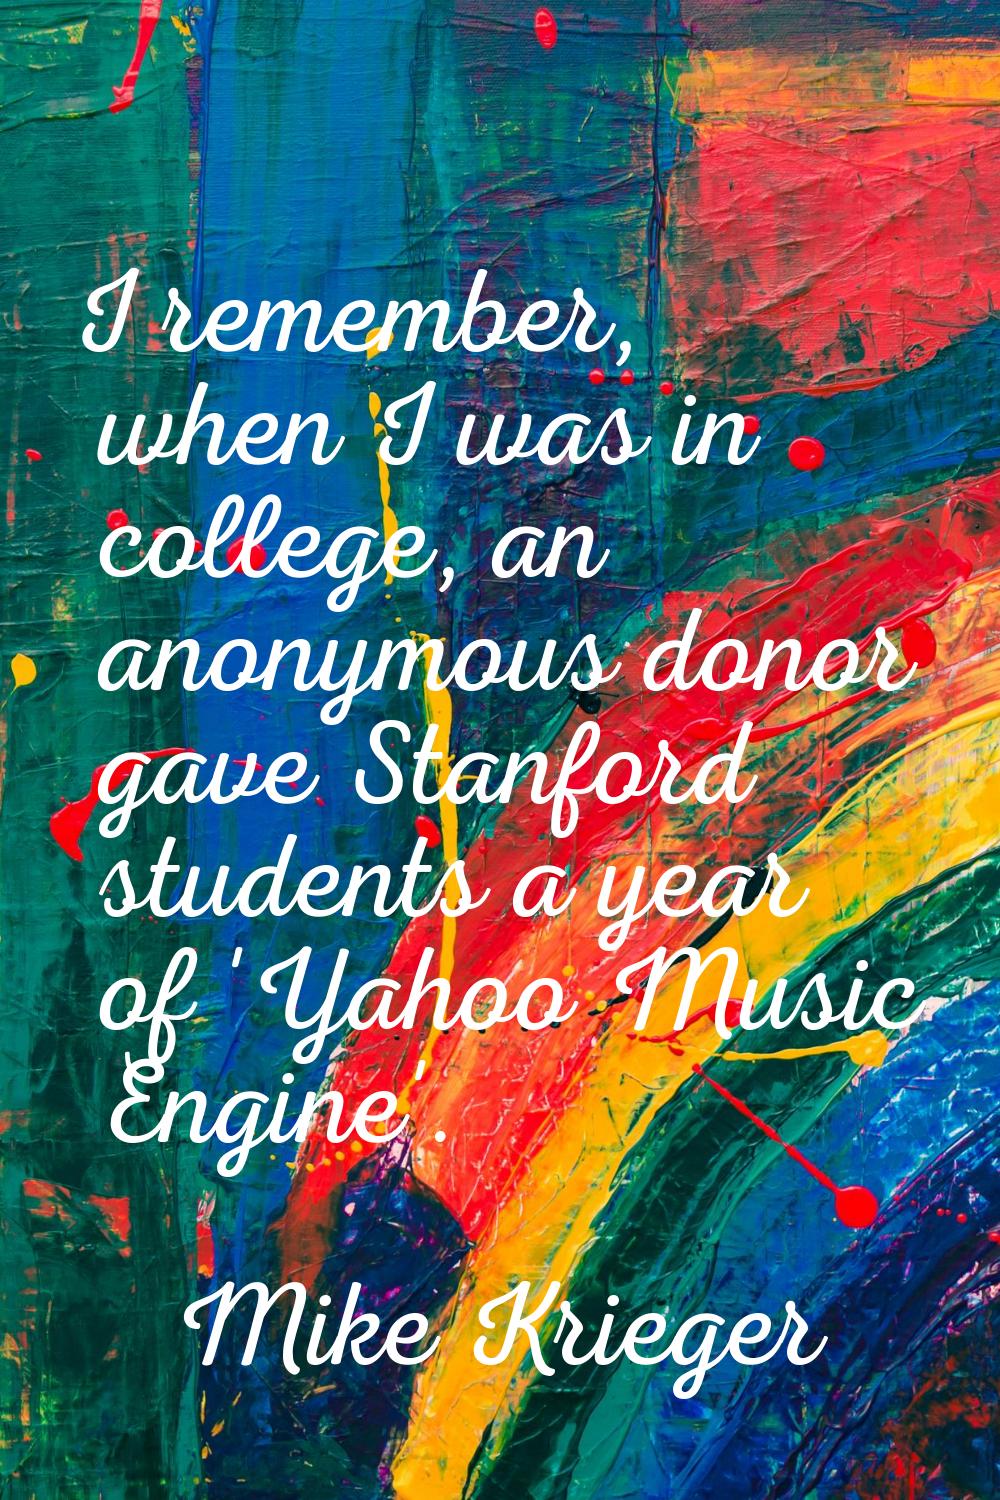 I remember, when I was in college, an anonymous donor gave Stanford students a year of 'Yahoo Music